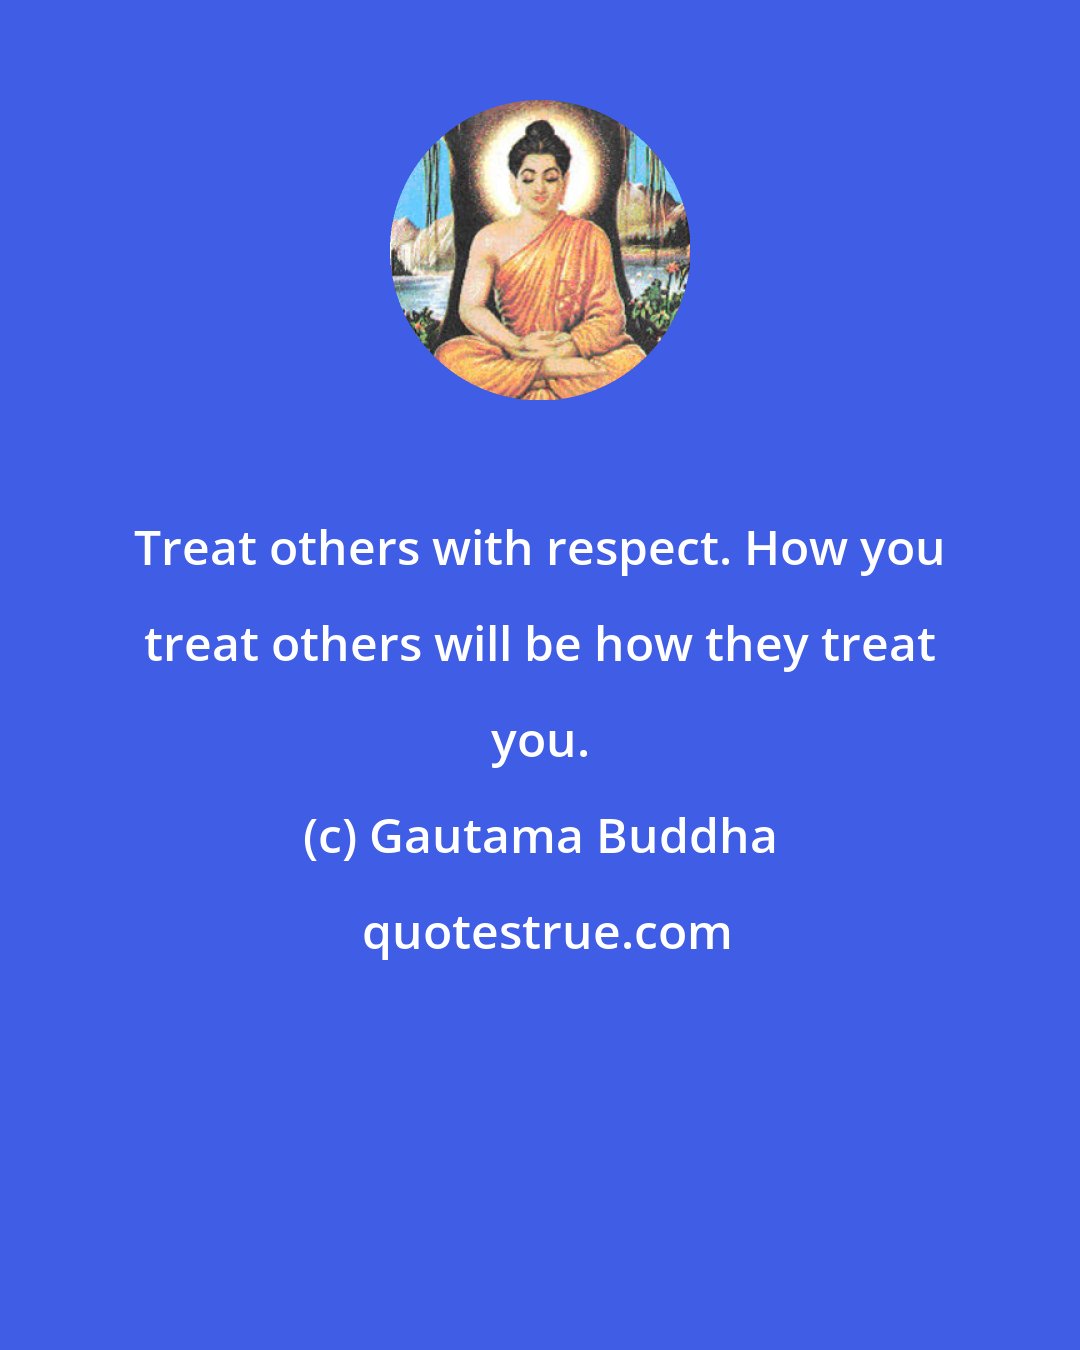 Gautama Buddha: Treat others with respect. How you treat others will be how they treat you.